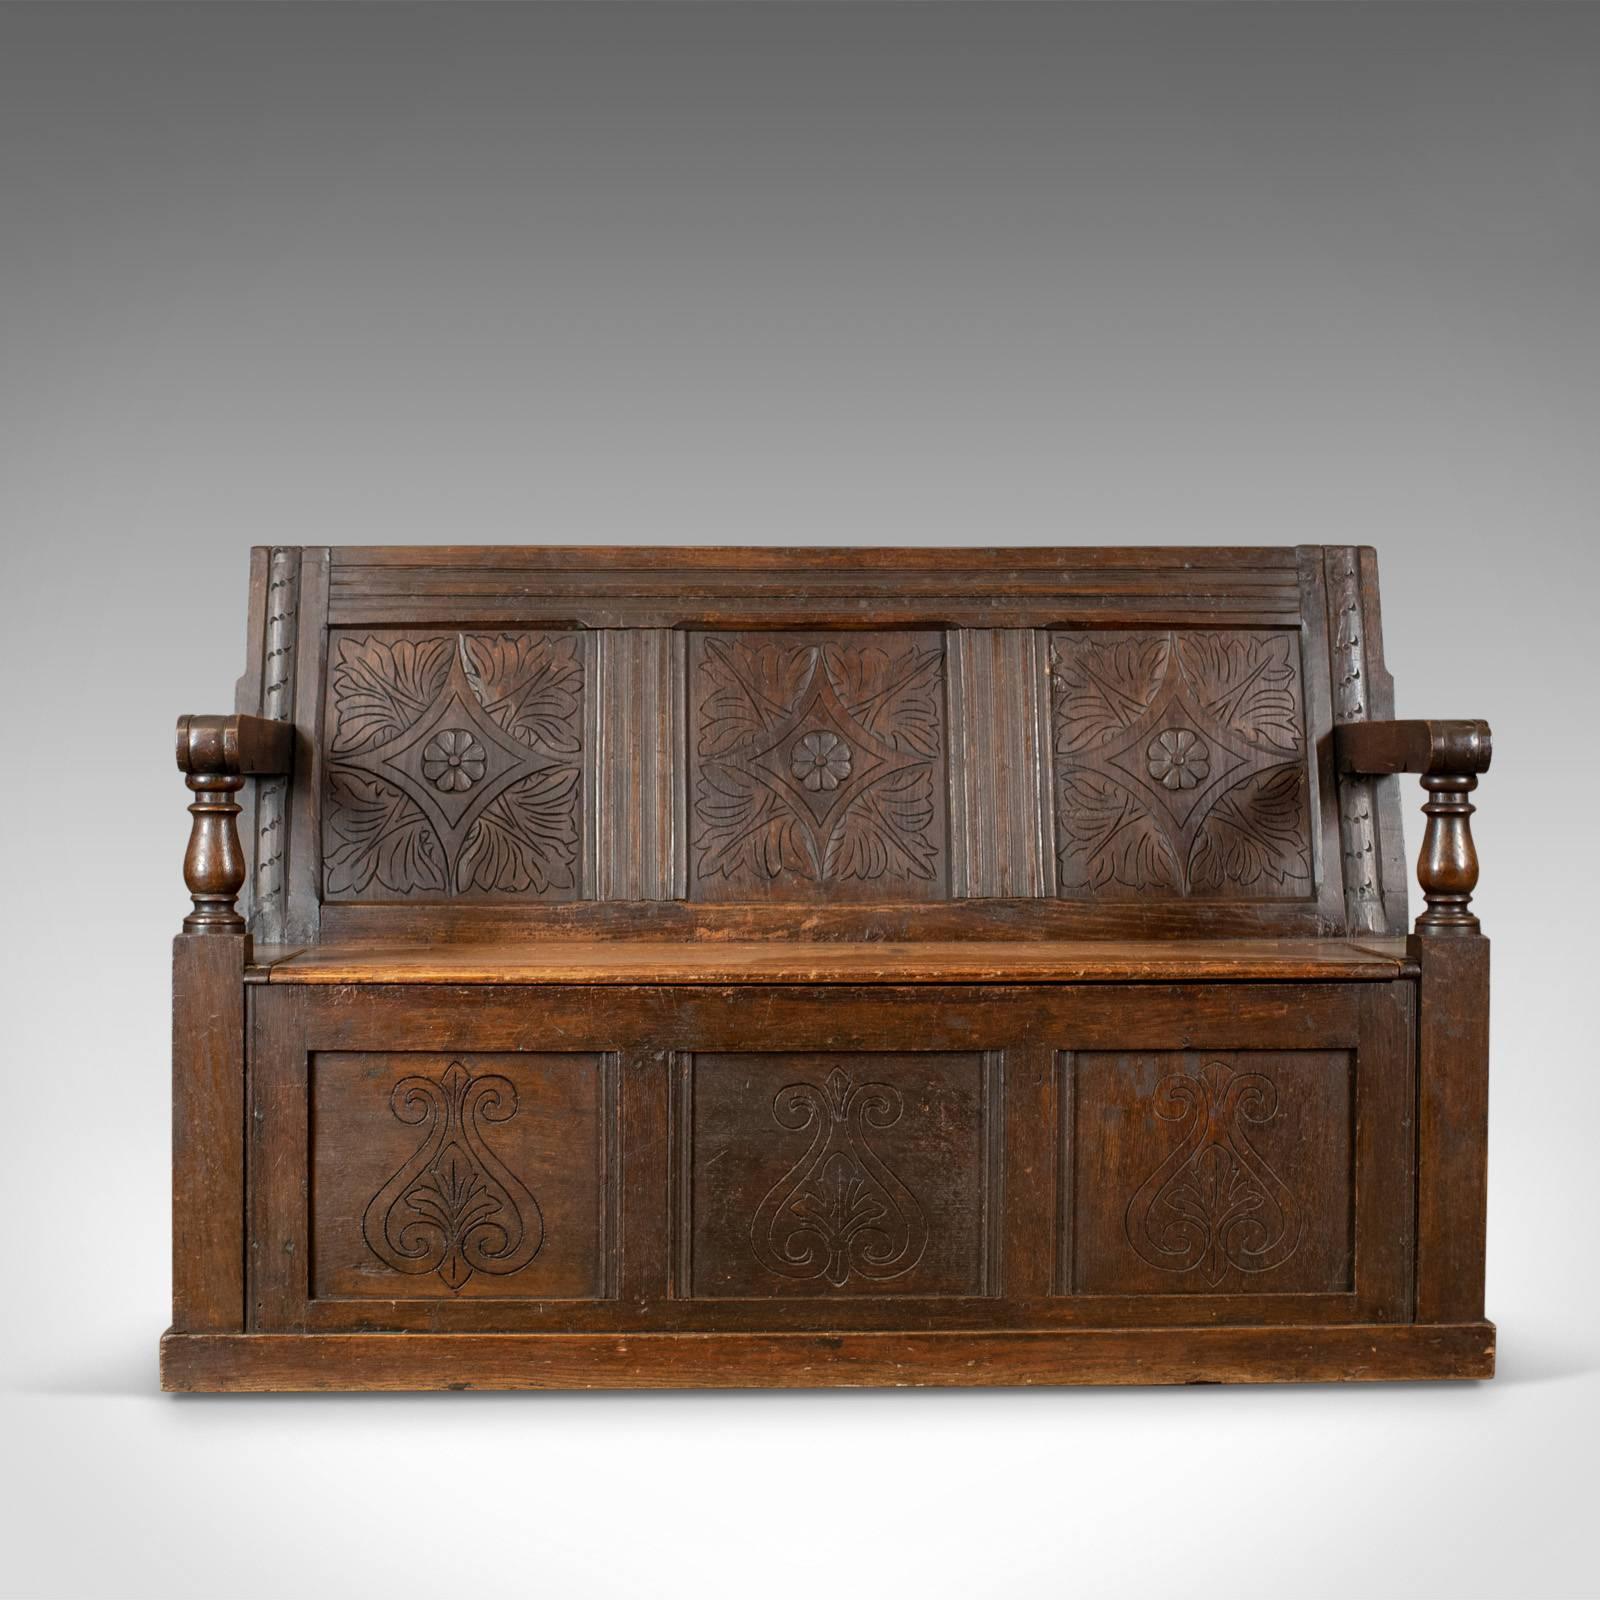 This is an antique coffer settle, an English oak bench chest seat dating to the early 18th century circa 1700 and later.

Good color in the lustrous wax polished finish
Carved interest with a desirable aged patina
Pegged and panelled